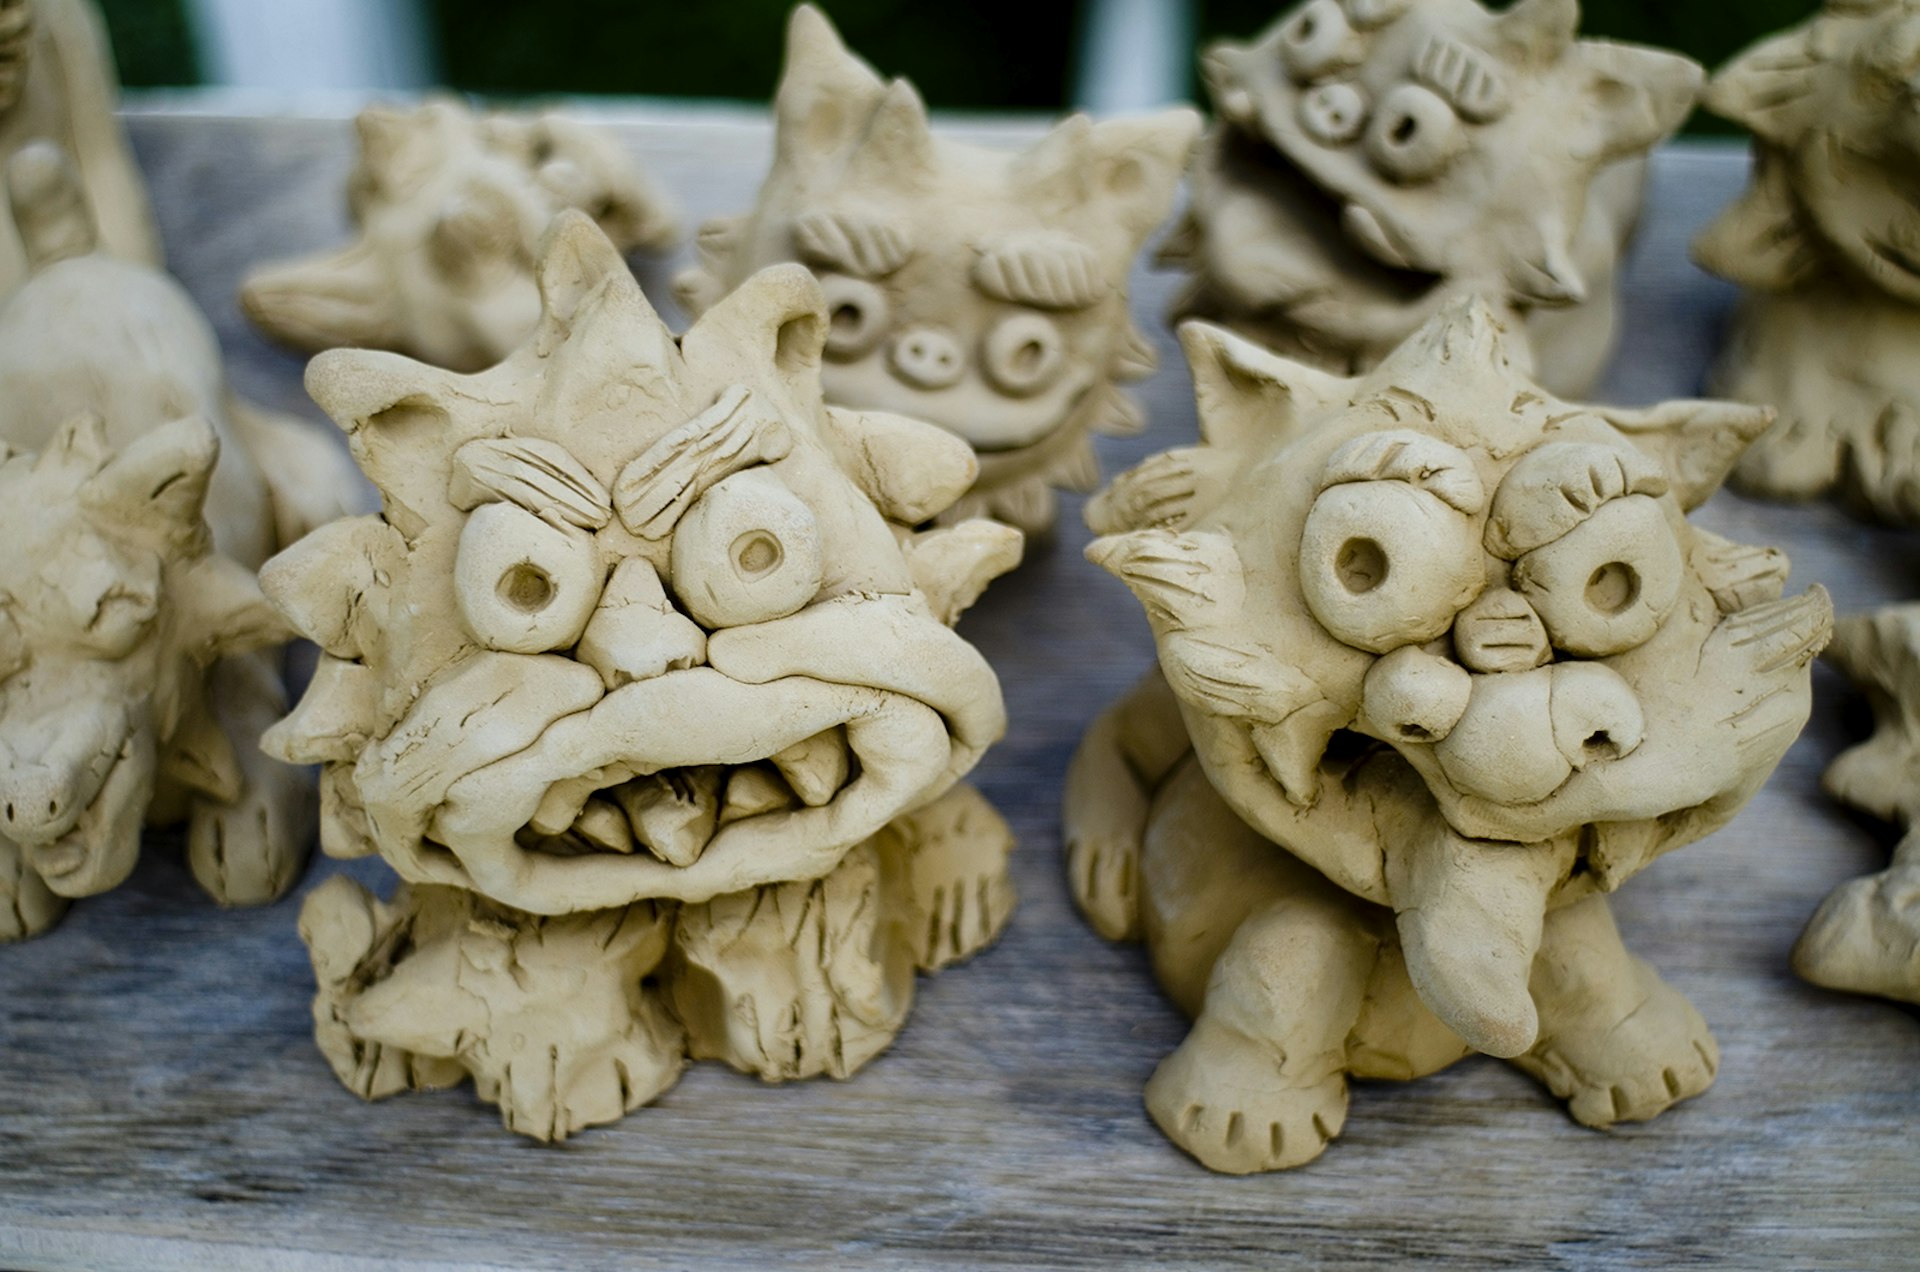 Features - Little clay Okinawan guardian lion dogs freshly crafted in okinawa